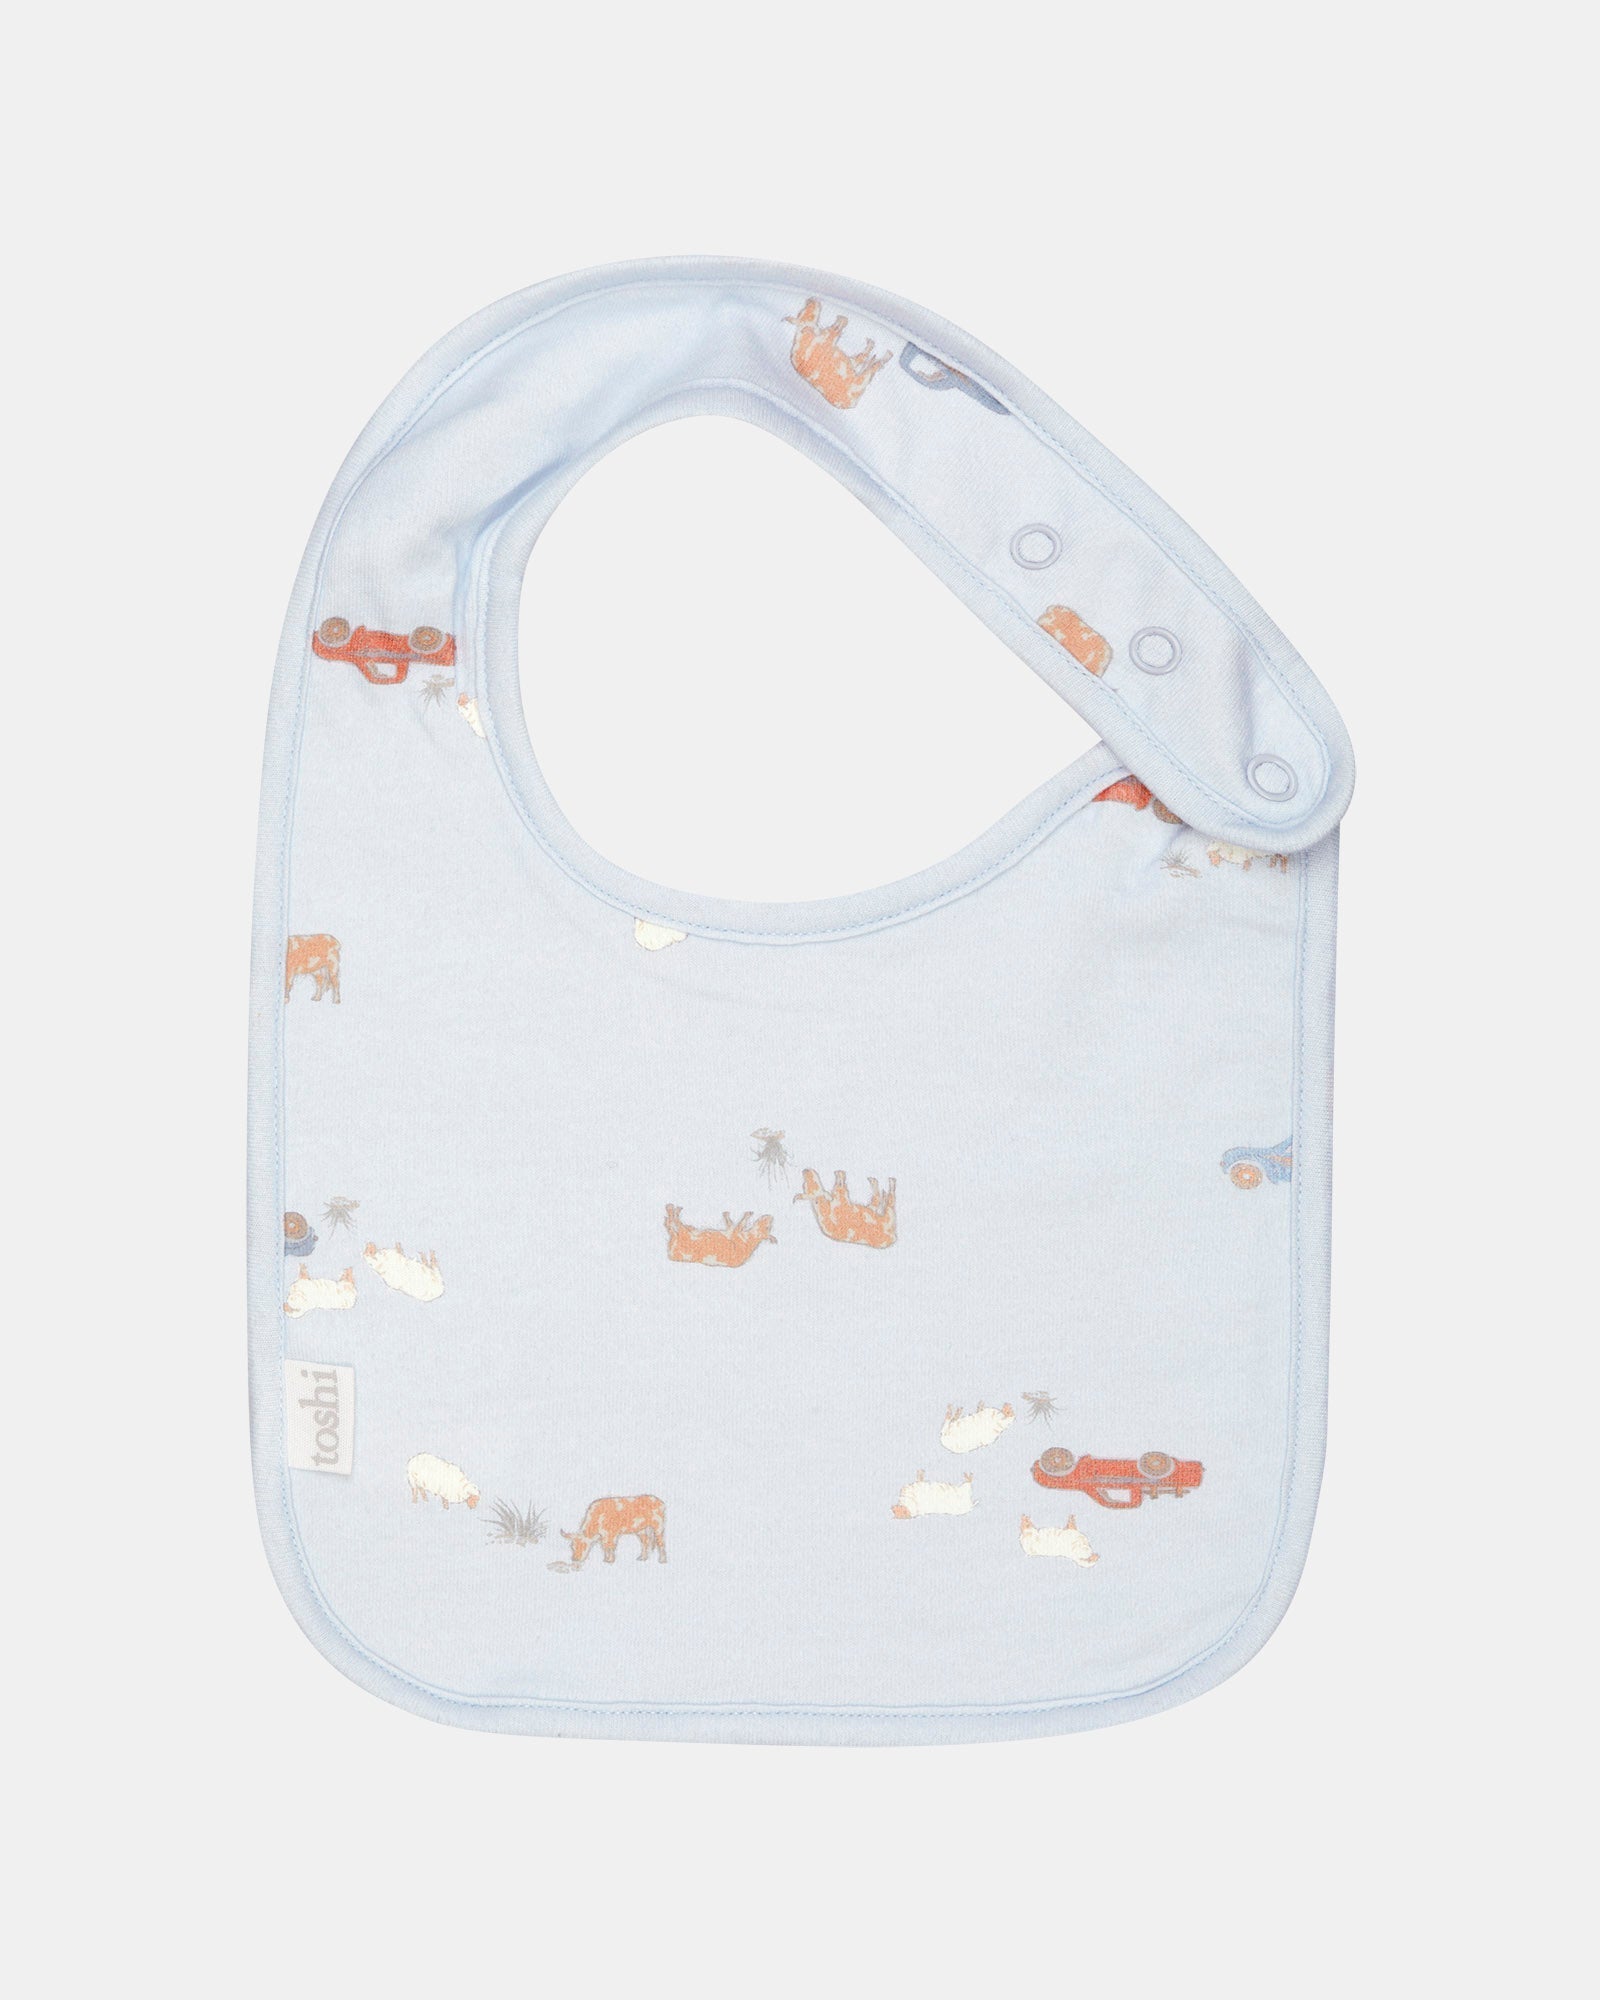 Baby Bib Story 2pcs - Sheep Station-Clothing & Accessories-Toshi-The Bay Room